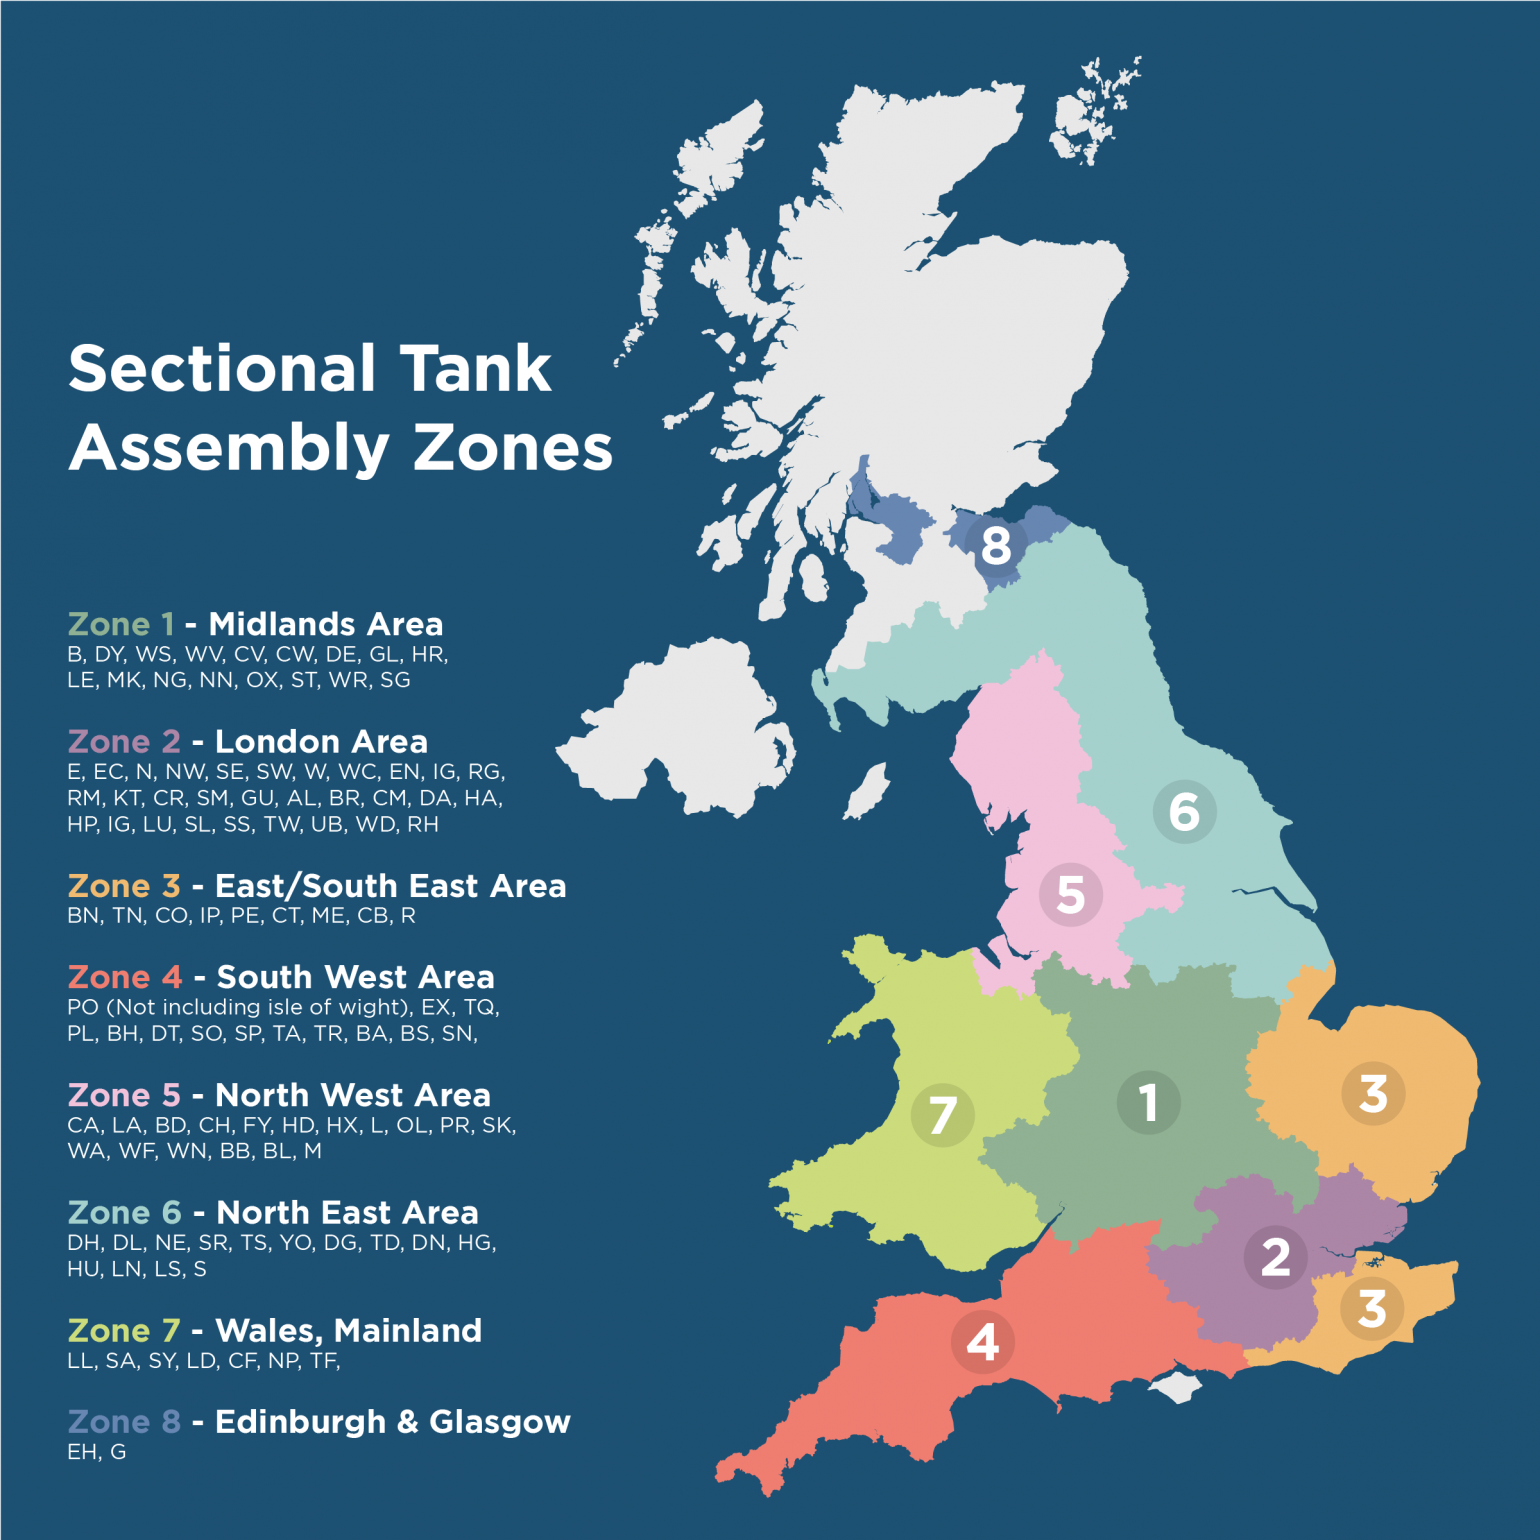 Sectional Tanks Assembly Zones